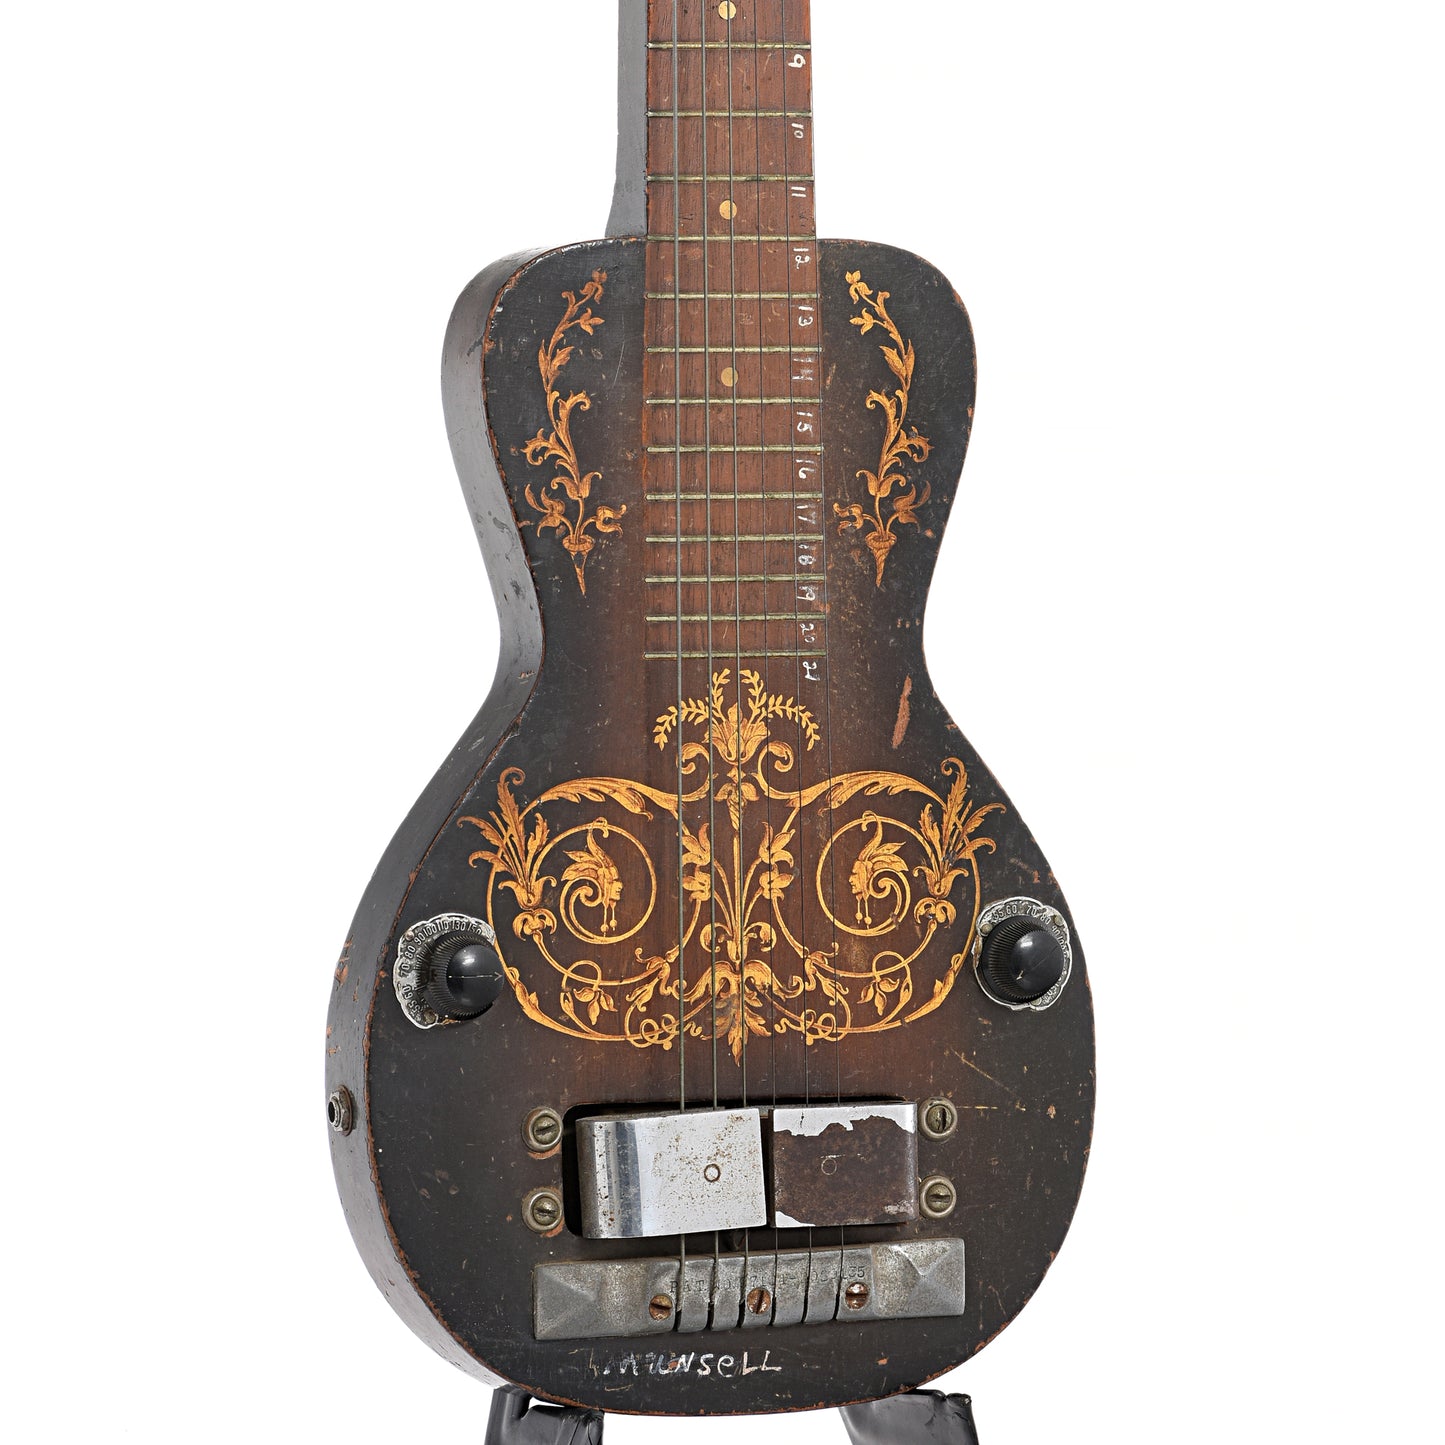 Front and side of Oahu Diana Deluxe Lap Steel (c.1936-38)